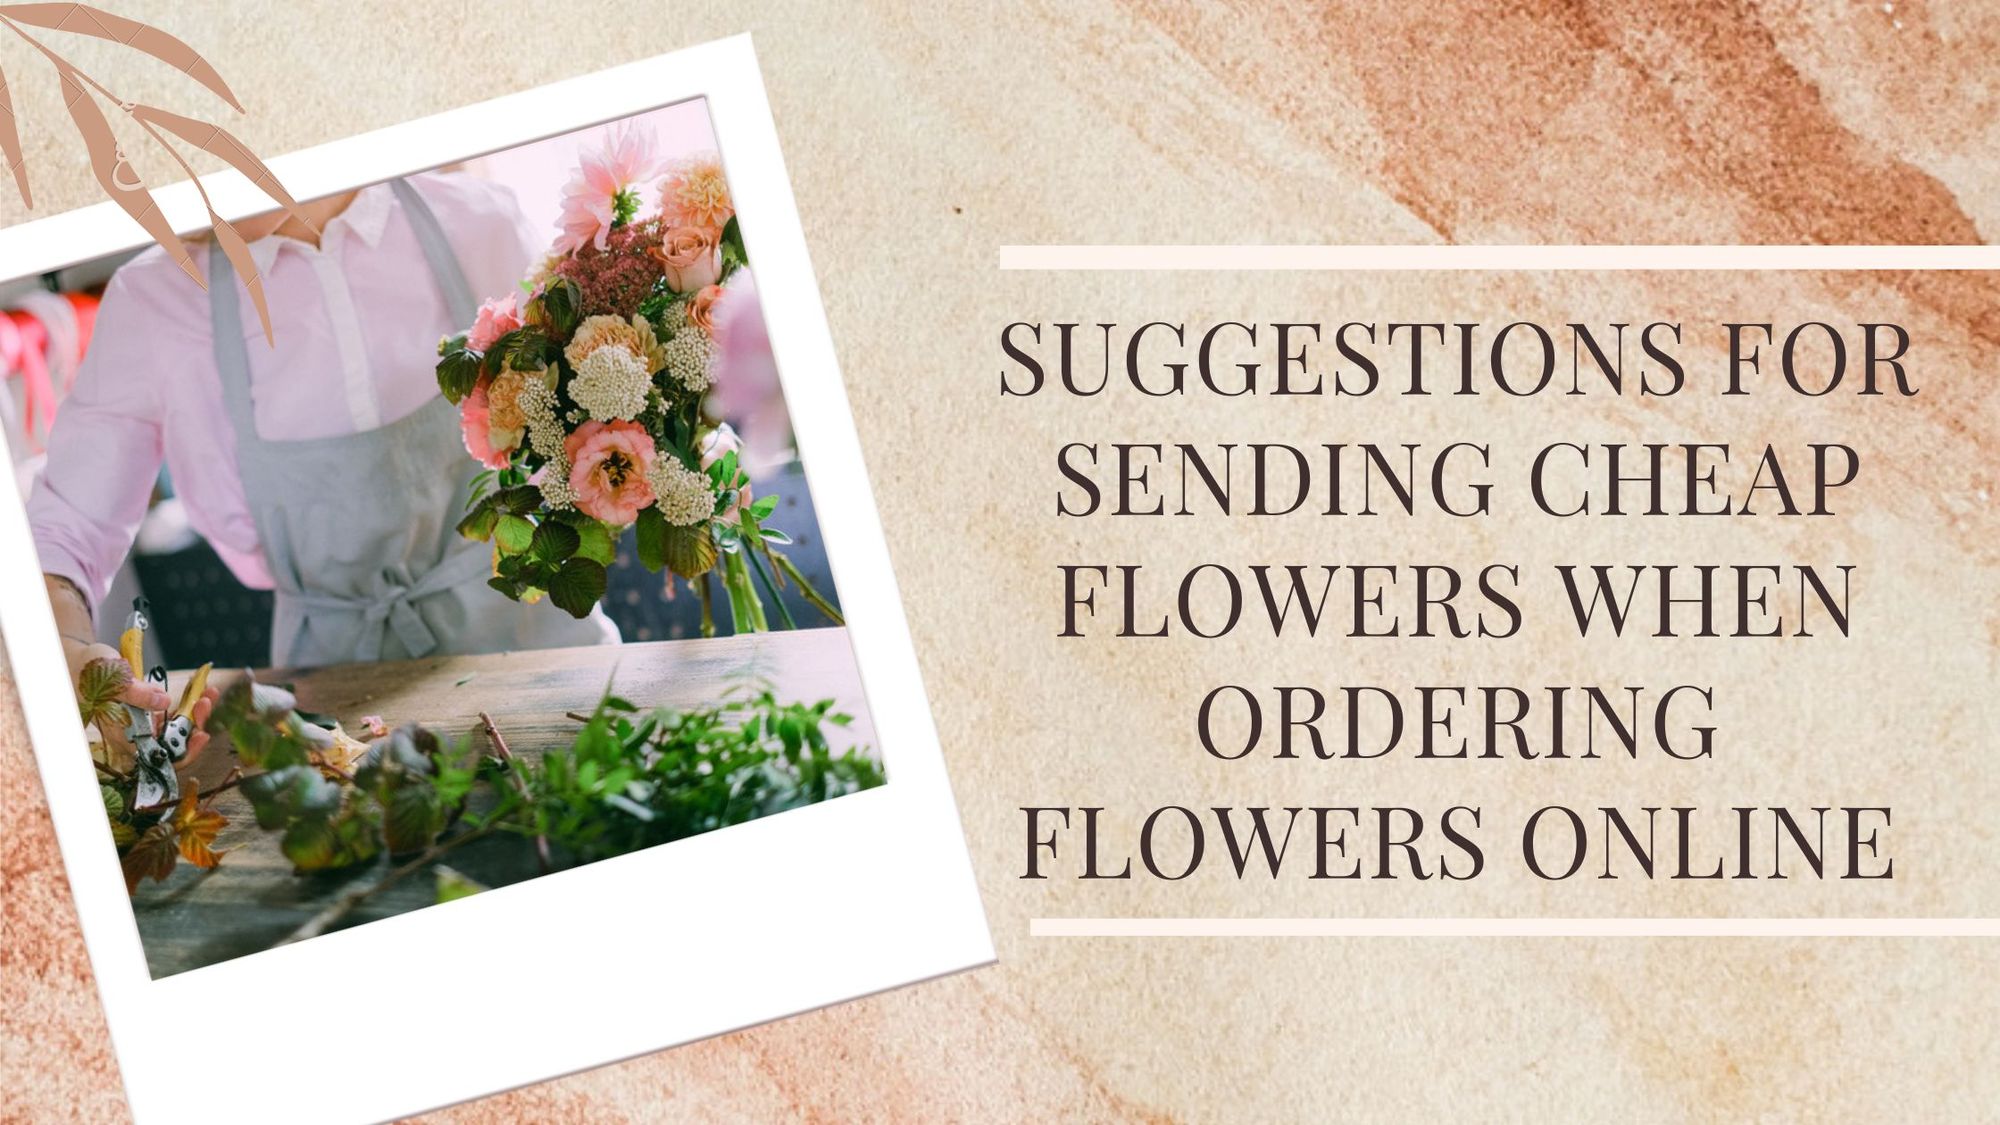 Five Suggestions For Sending Cheap Flowers When Ordering Flowers Online